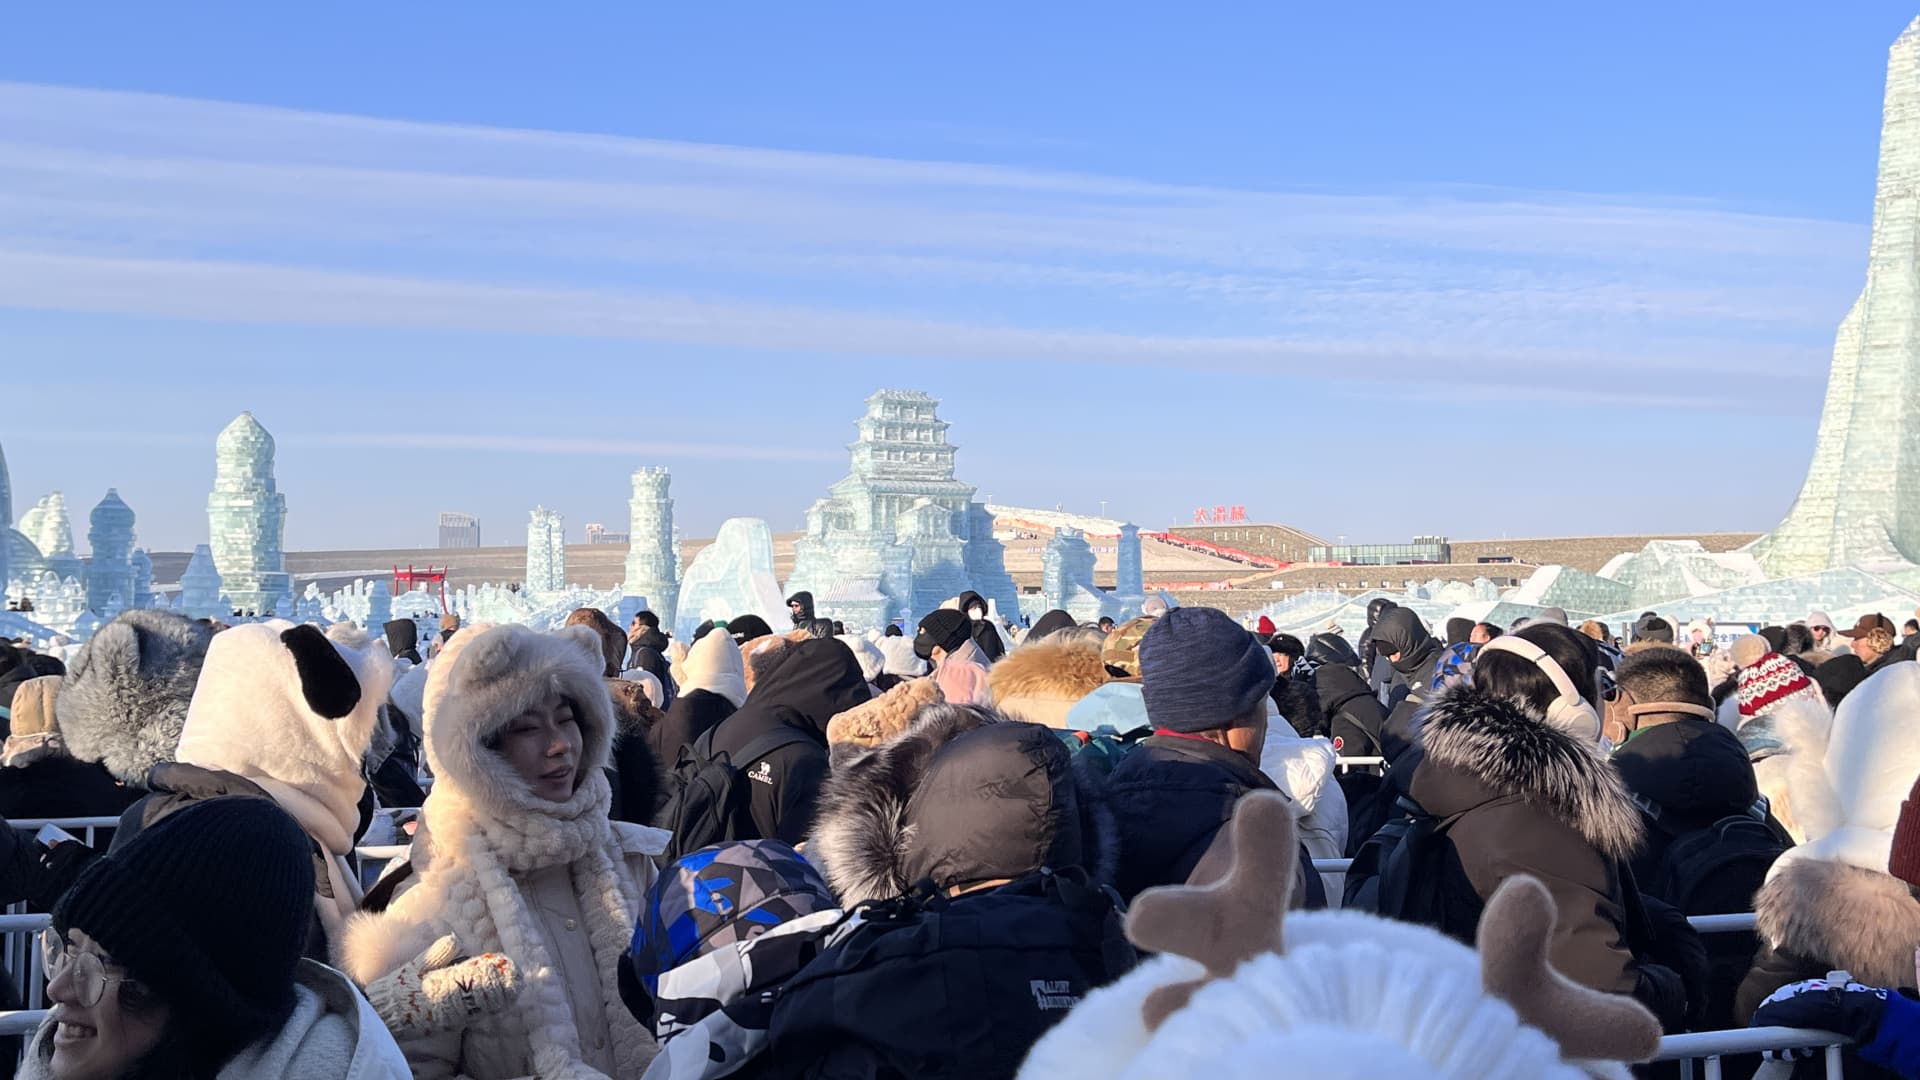 Some attendees at Harbin's 2024 festivities complained about long lines.